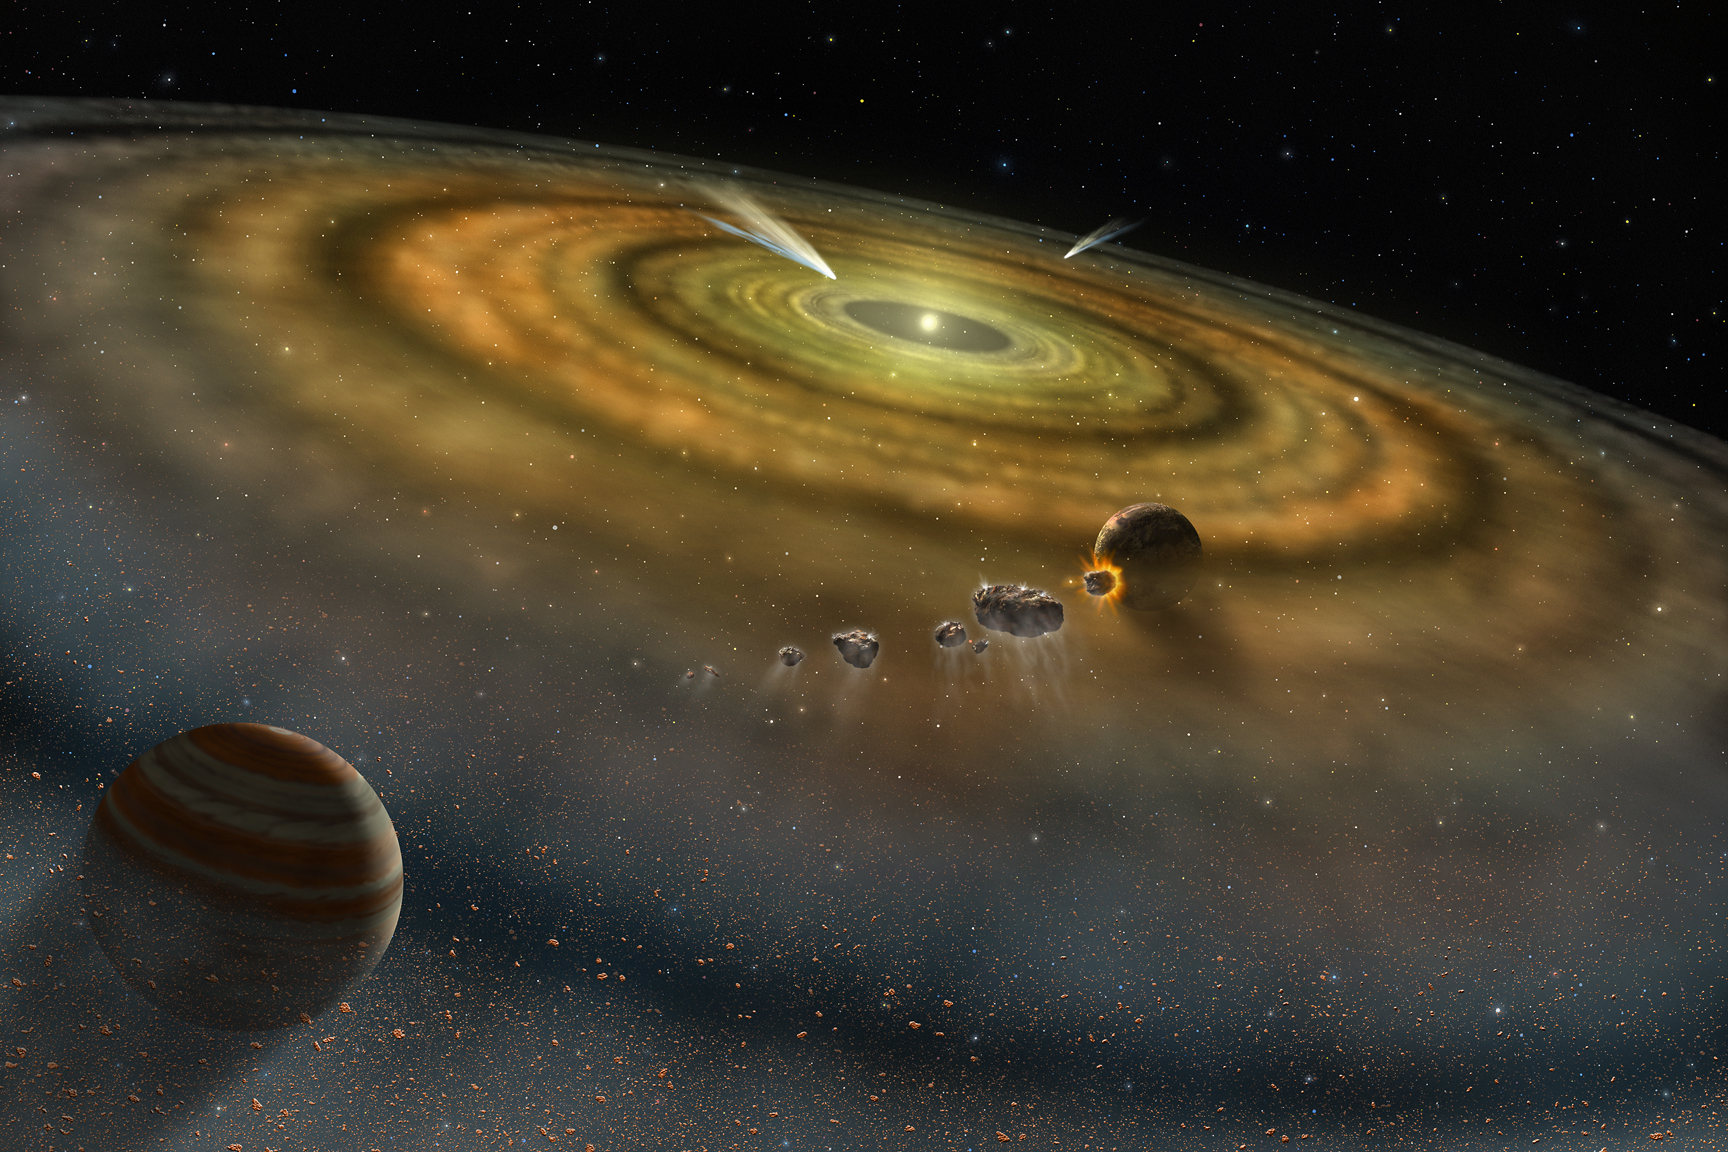 An illustration of a swirling disk of gas and dust in space, with a couple of planets forming, plus a couple of comets in the distance. Several comet-like fragments are seen crashing or about to crash into one of the planets.